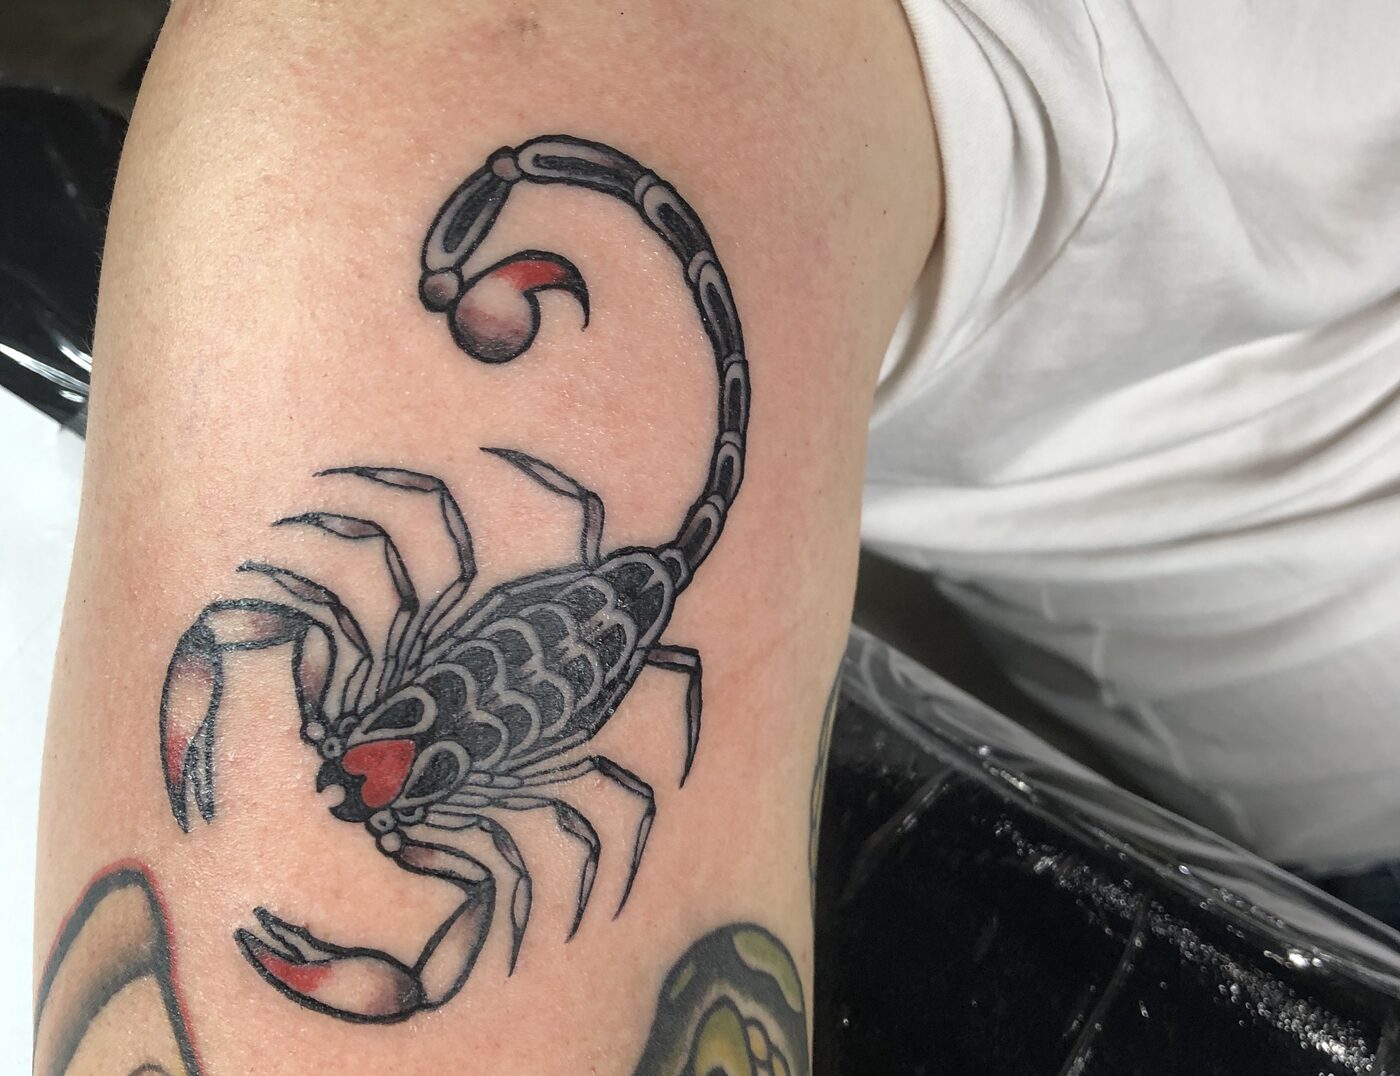 Cap Bagong Tatu Studio - Borneo scorpion tattoo. Usually used by men, wear  by Dayak warrior as a protection in battle. Made by hand tapping, inked by  @vincentwhisnu assisted by @henuromanto, for @